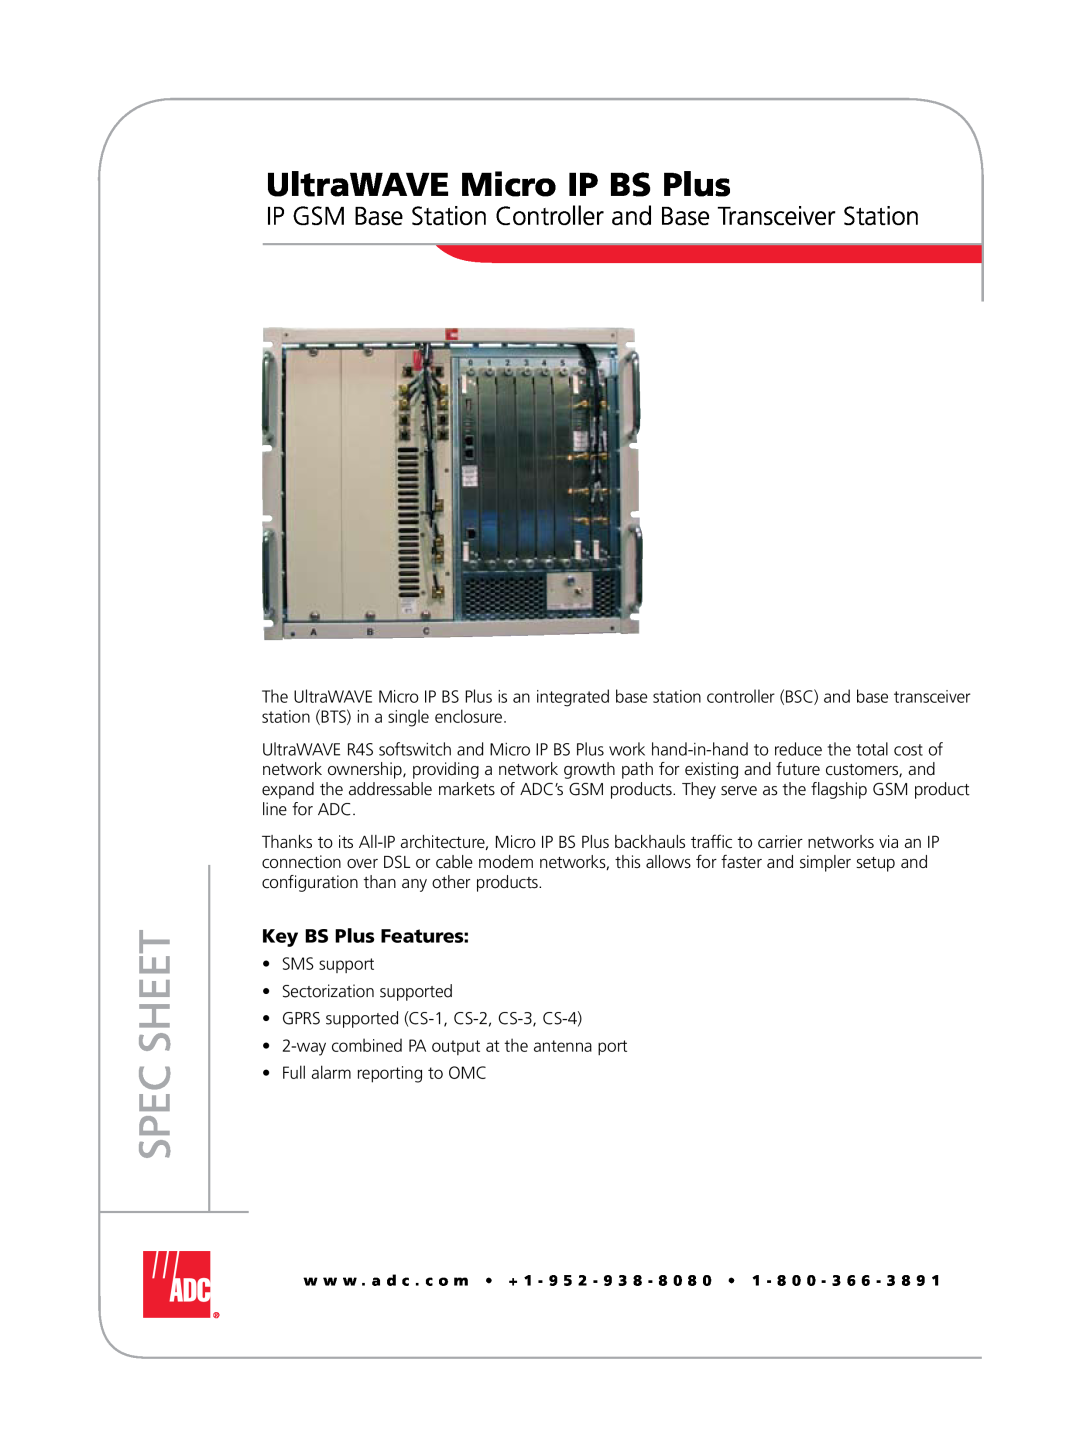 ADC manual UltraWAVE Micro IP BS Plus, IP GSM Base Station Controller and Base Transceiver Station, Spec Sheet 